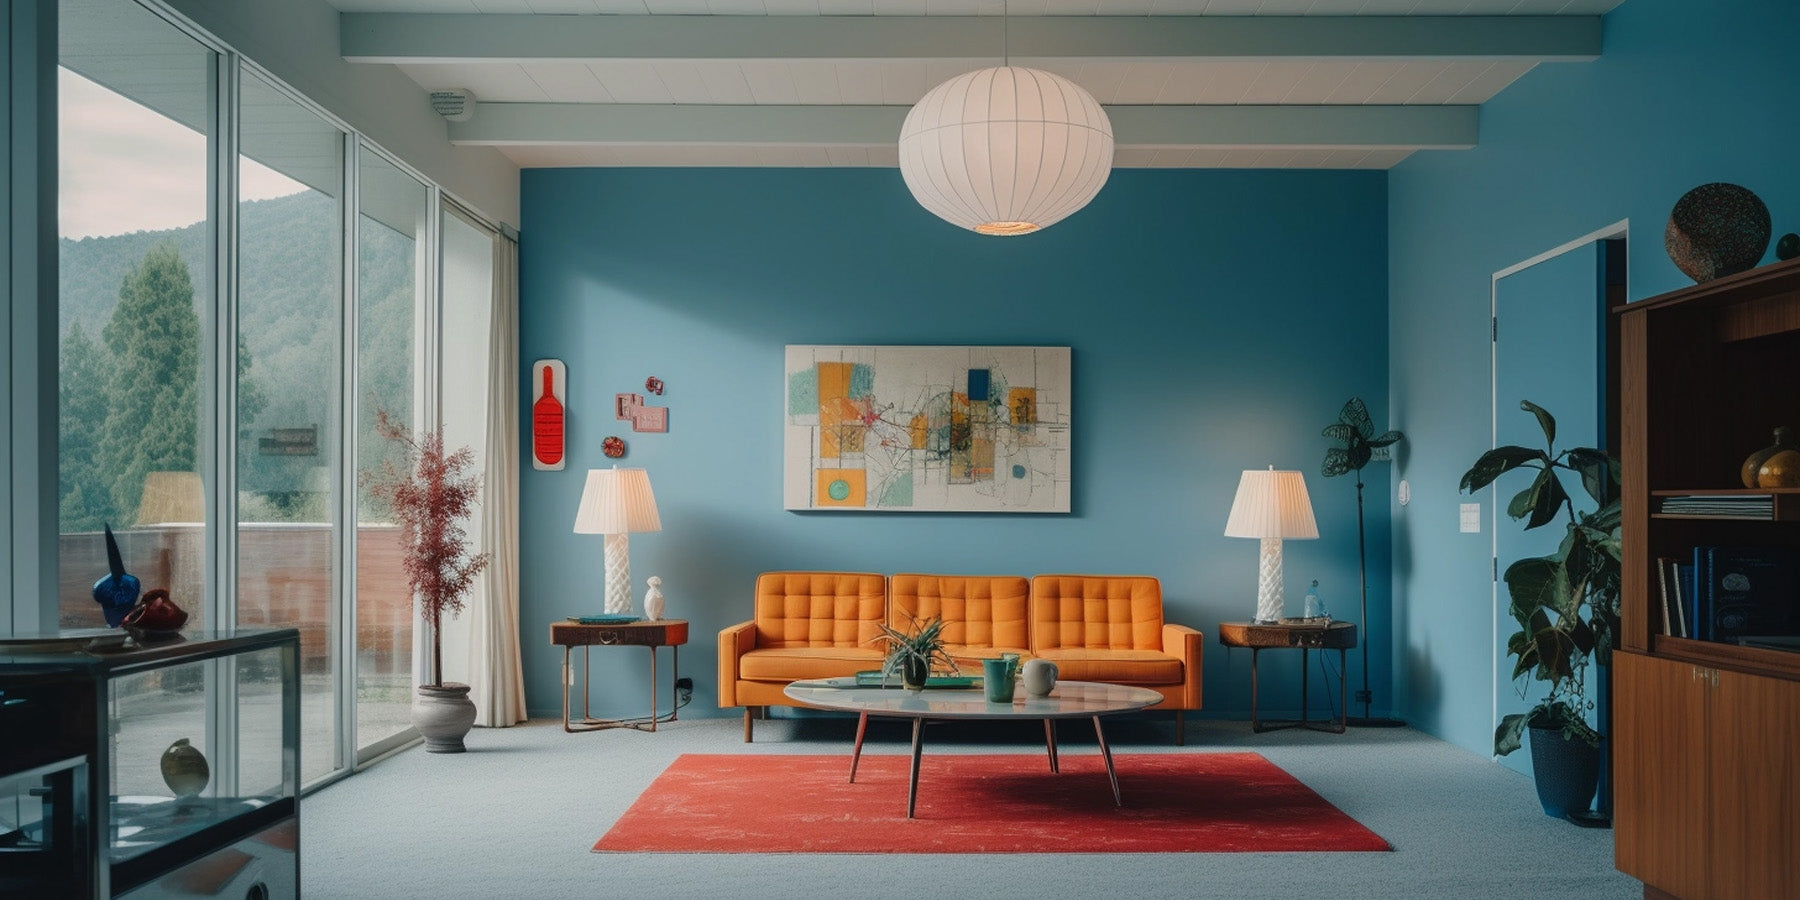 a mid-century modern living room with blue walls and orange couch.